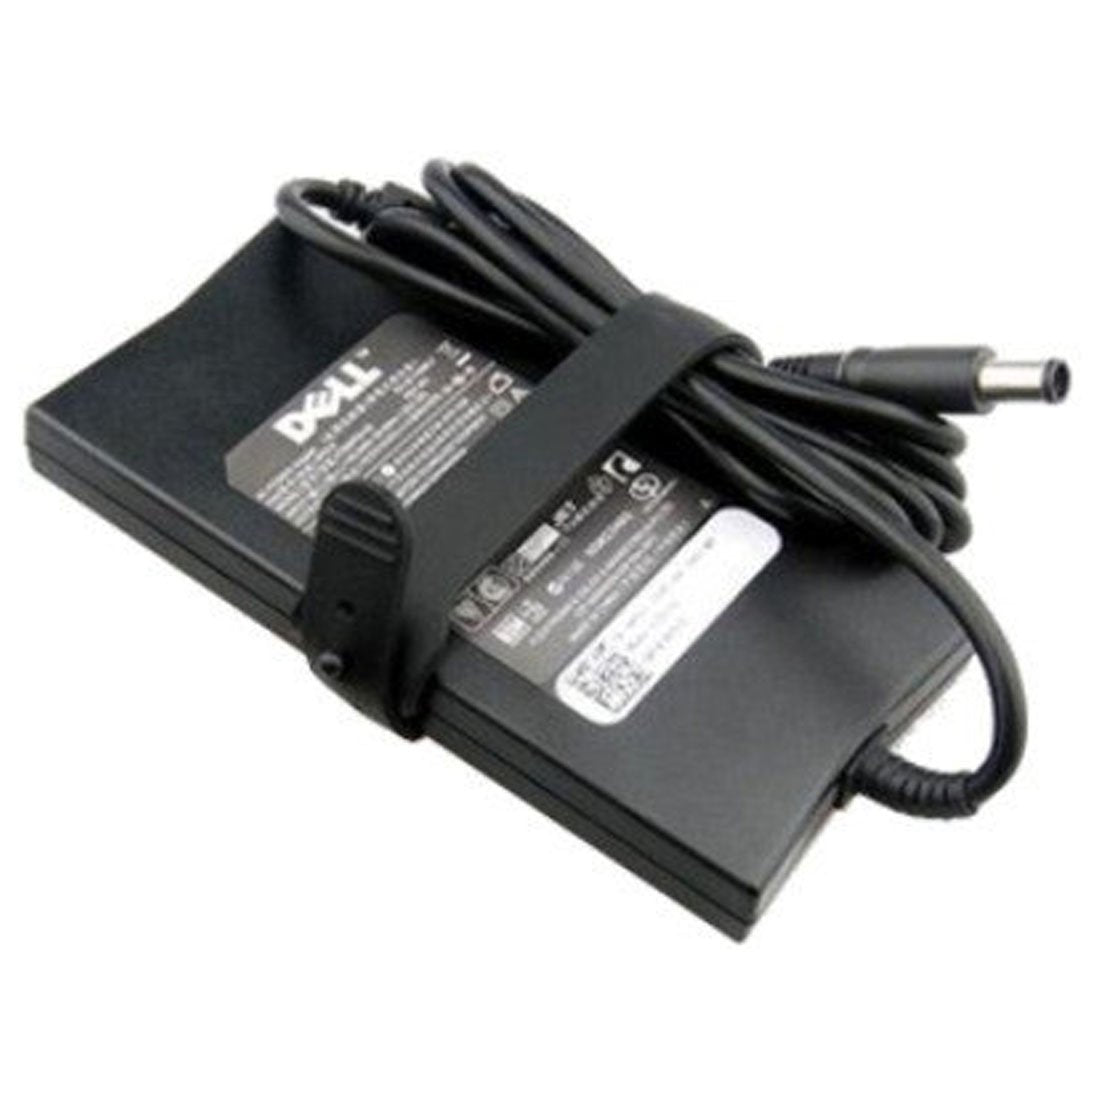 Dell Original 130W 19.5V 7.4mm Pin Laptop Charger Adapter for Inspiron 700m With Power Cord